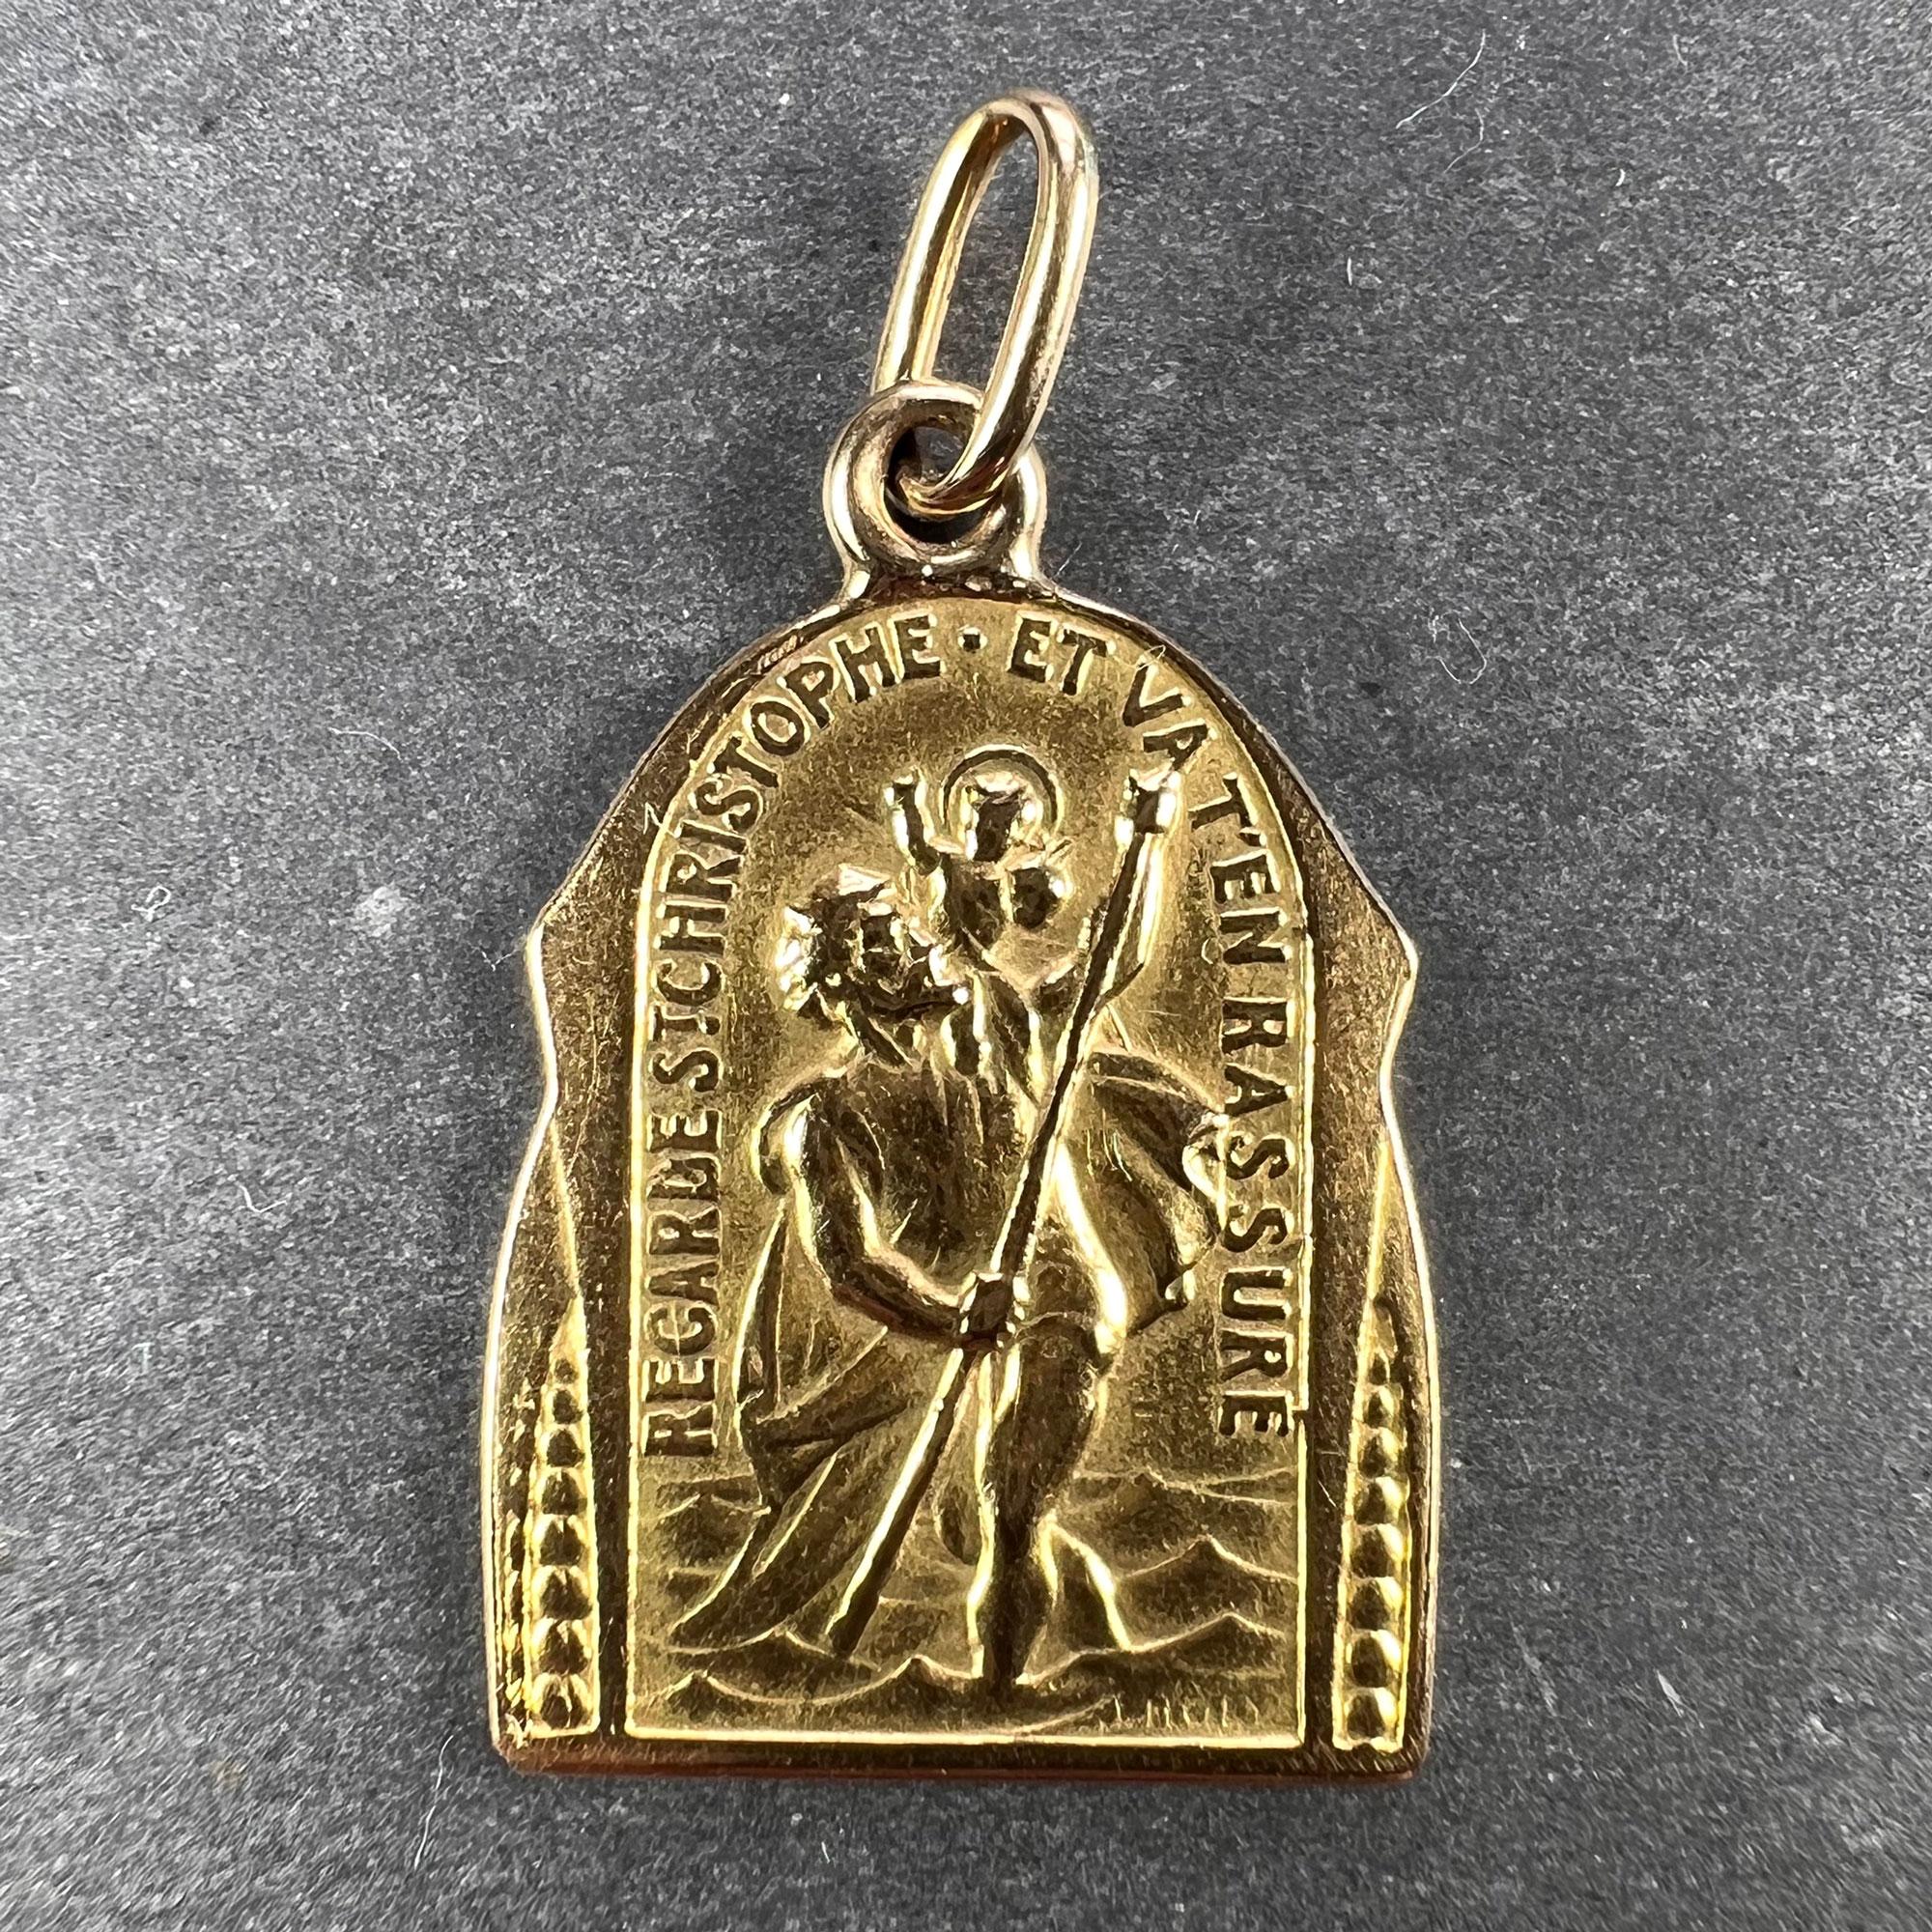 A French 18 karat (18K) yellow gold charm pendant designed as a medal depicting Saint Christopher carrying the infant Christ over a river with the motto of ‘Regarde St. Christophe et va t’en rassure’ to one side, and a depiction of the Triumph of